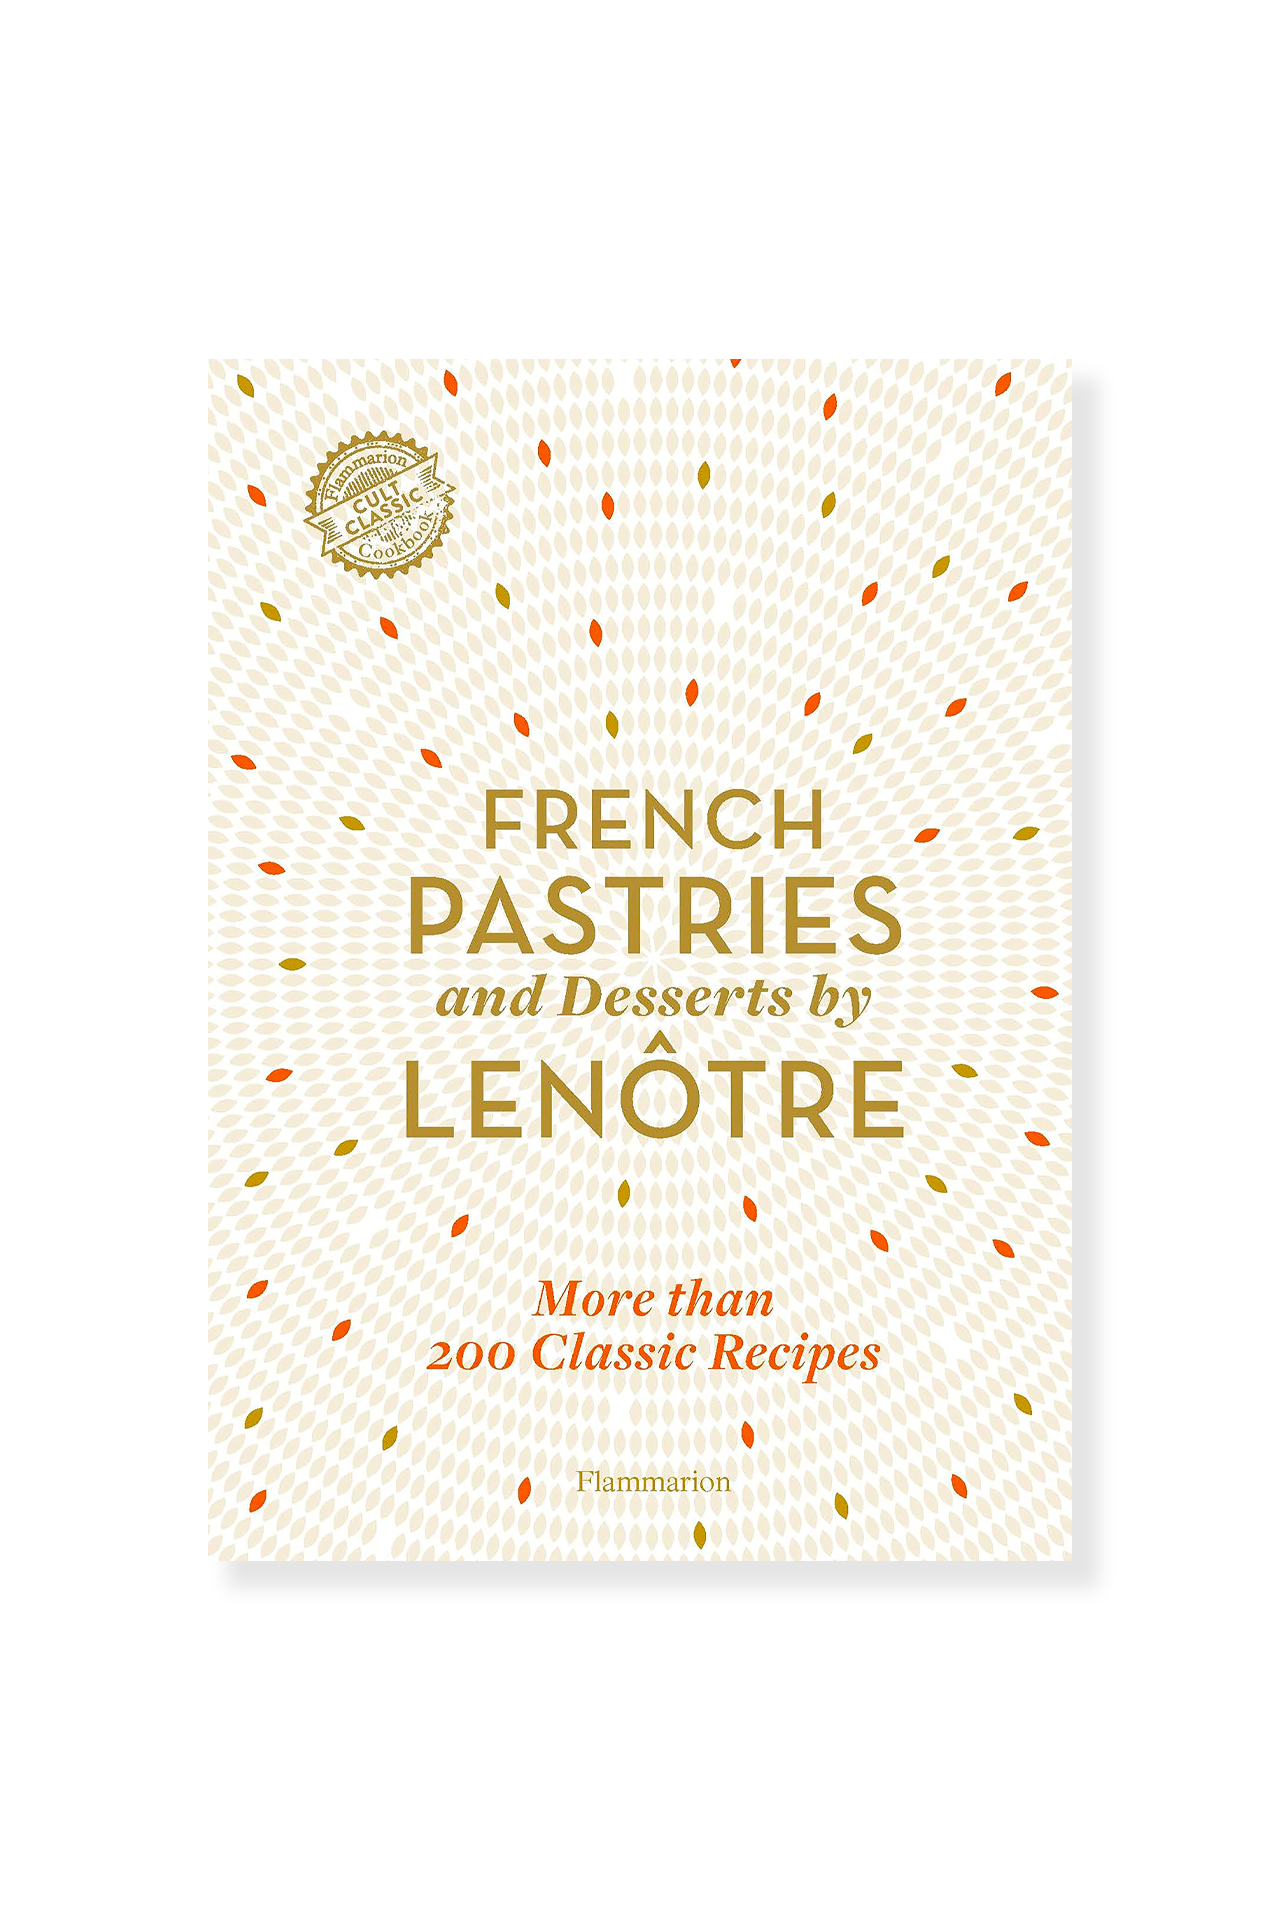 French Pastries and Desserts (6648331141235)